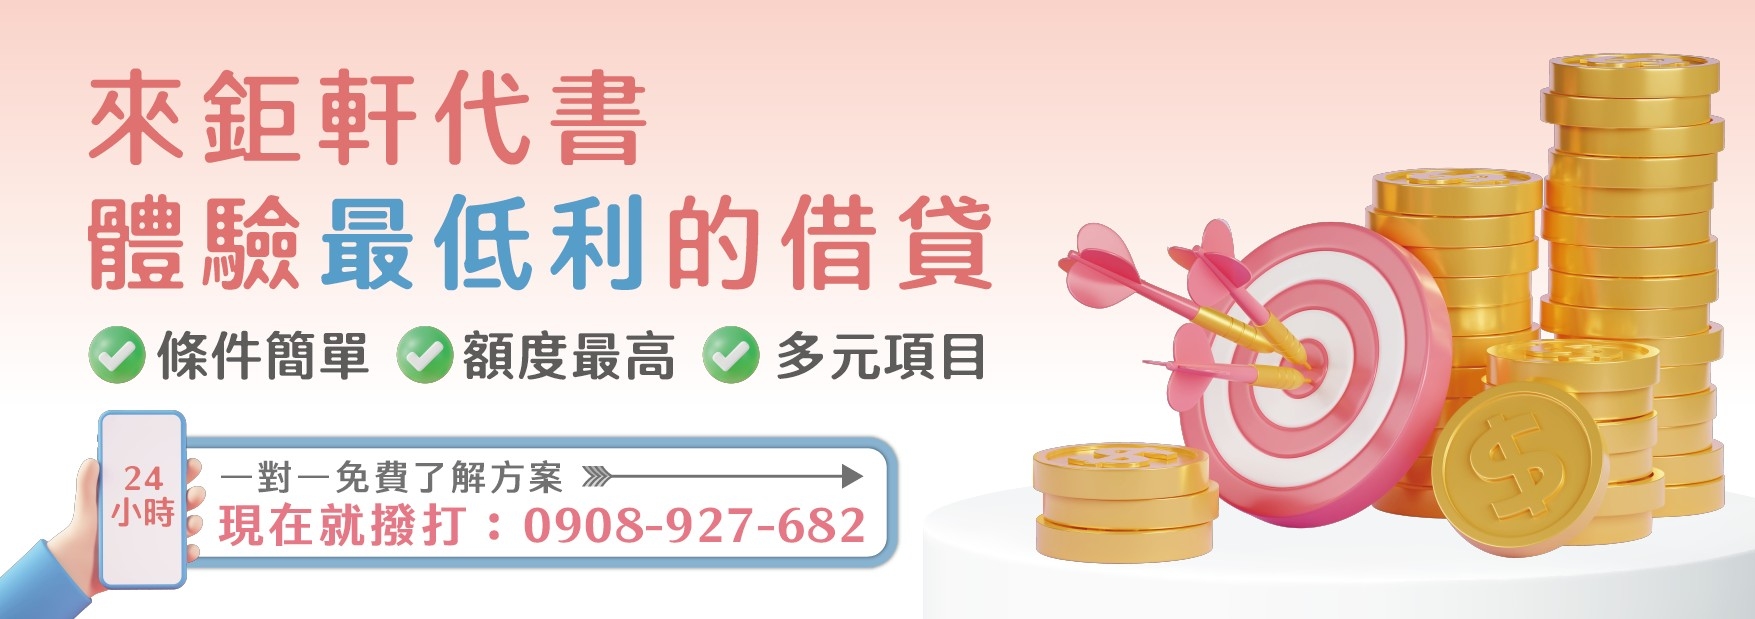 What are the conditions of Taoyuan mortgage bank? What is the highest mortgage percentage that can be borrowed?